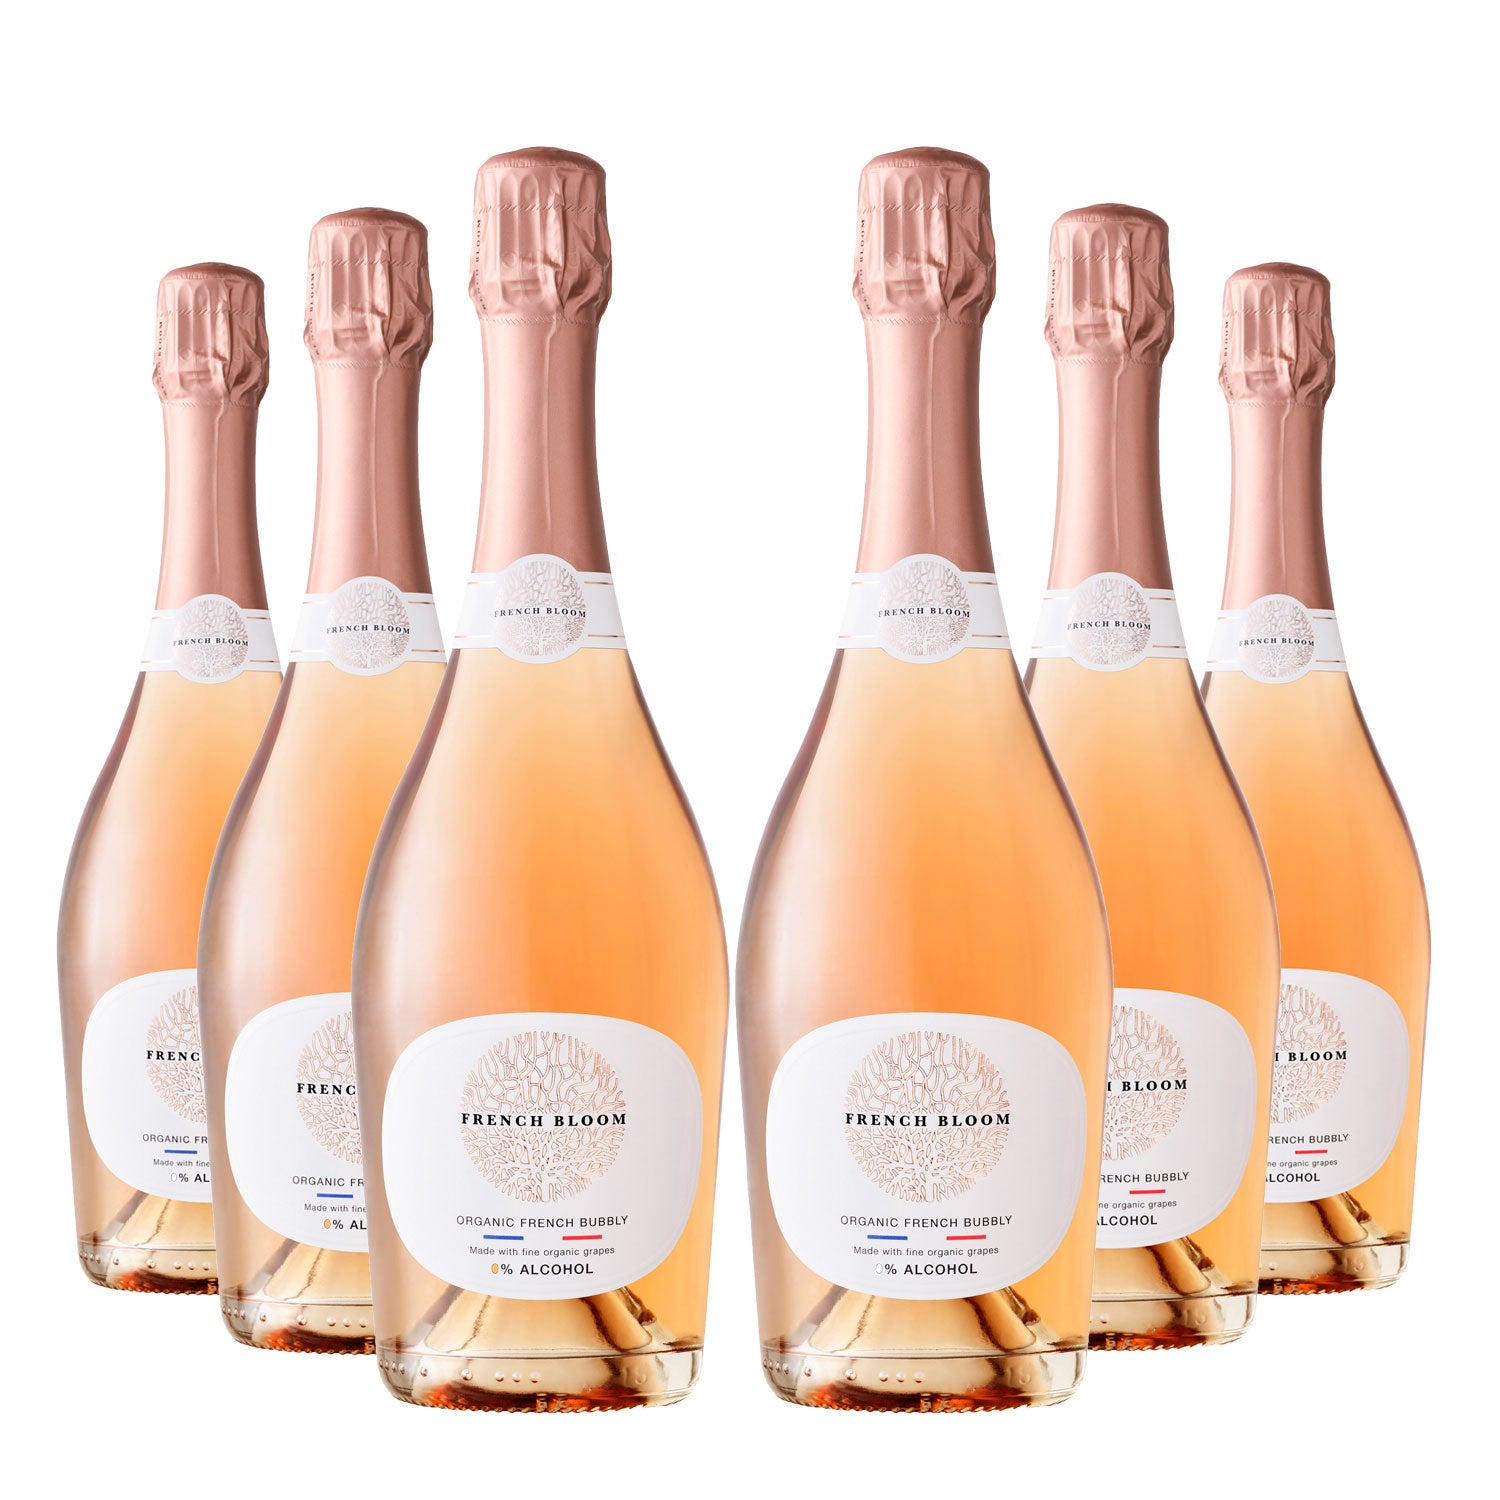 French Bloom - Le Rosé 0,0%